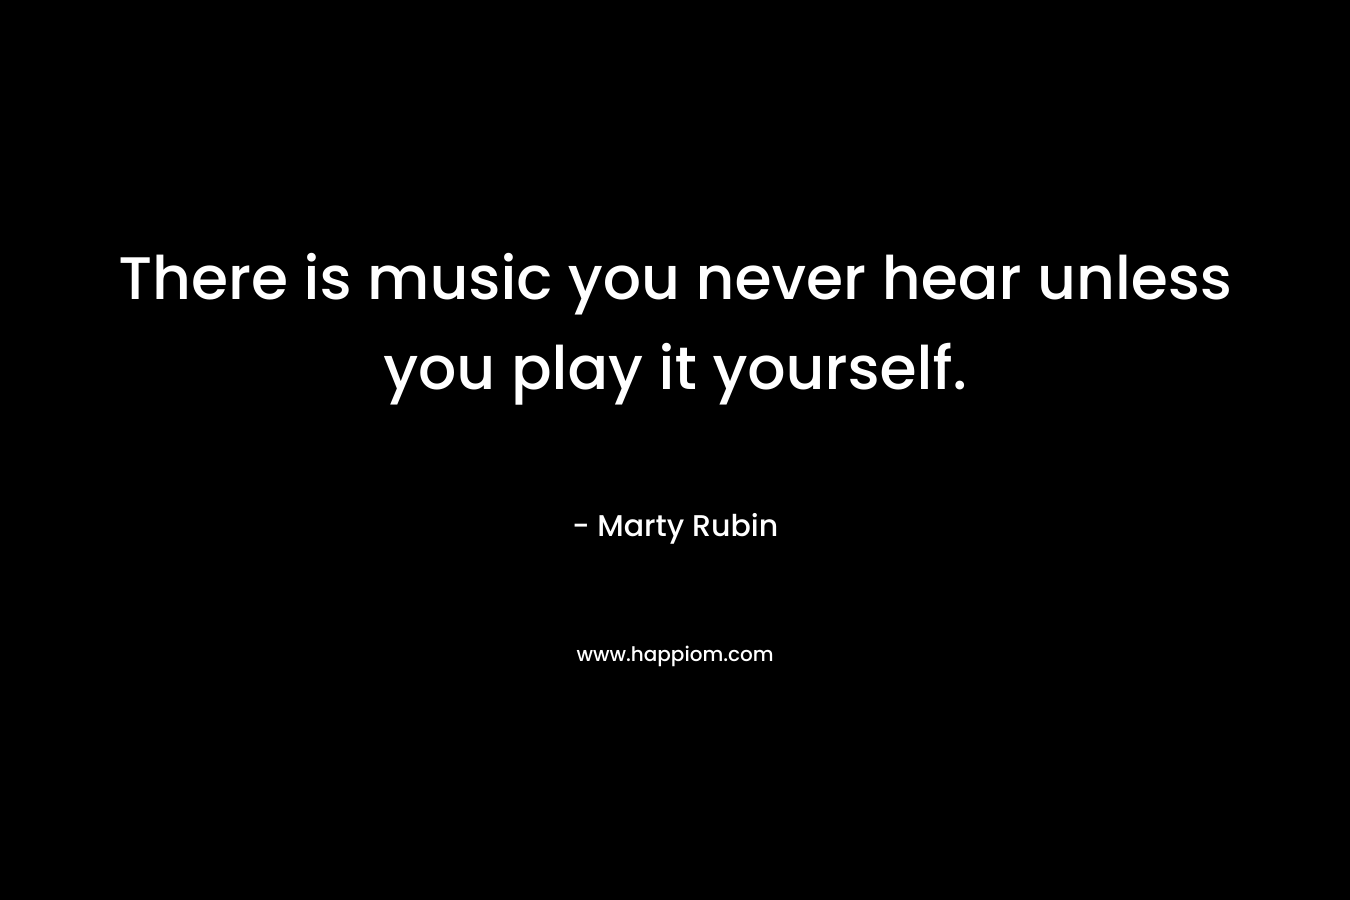 There is music you never hear unless you play it yourself.